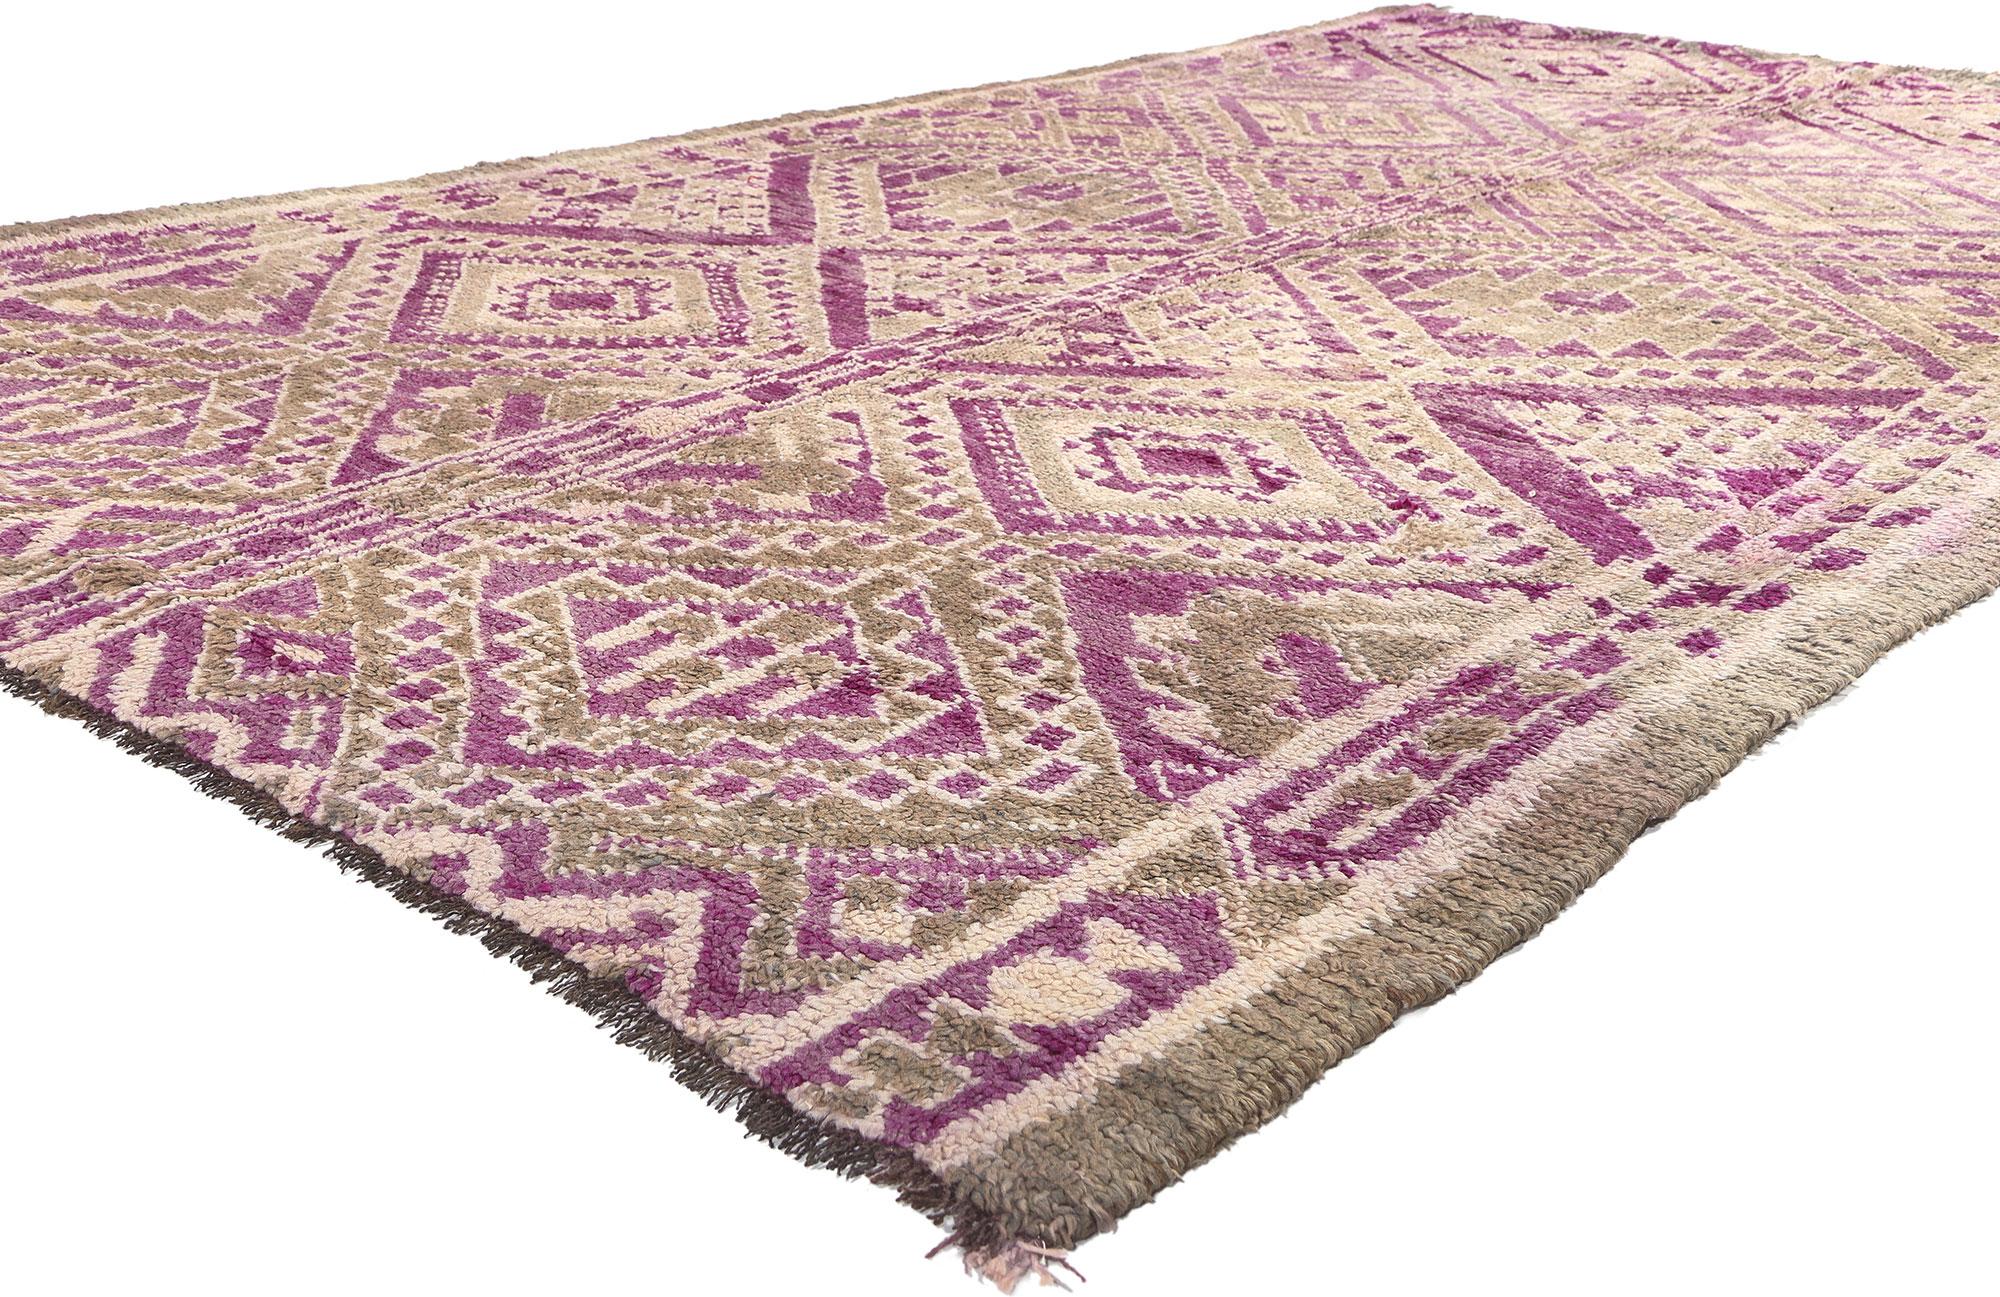 20666 Vintage Purple Beni MGuild Moroccan Rug, 05'08 x 10'04. Beni M'Guild rugs, originating from the Beni M'Guild tribe nestled in Morocco's Middle Atlas Mountains, embody a cherished tradition meticulously handcrafted by skilled Berber women,